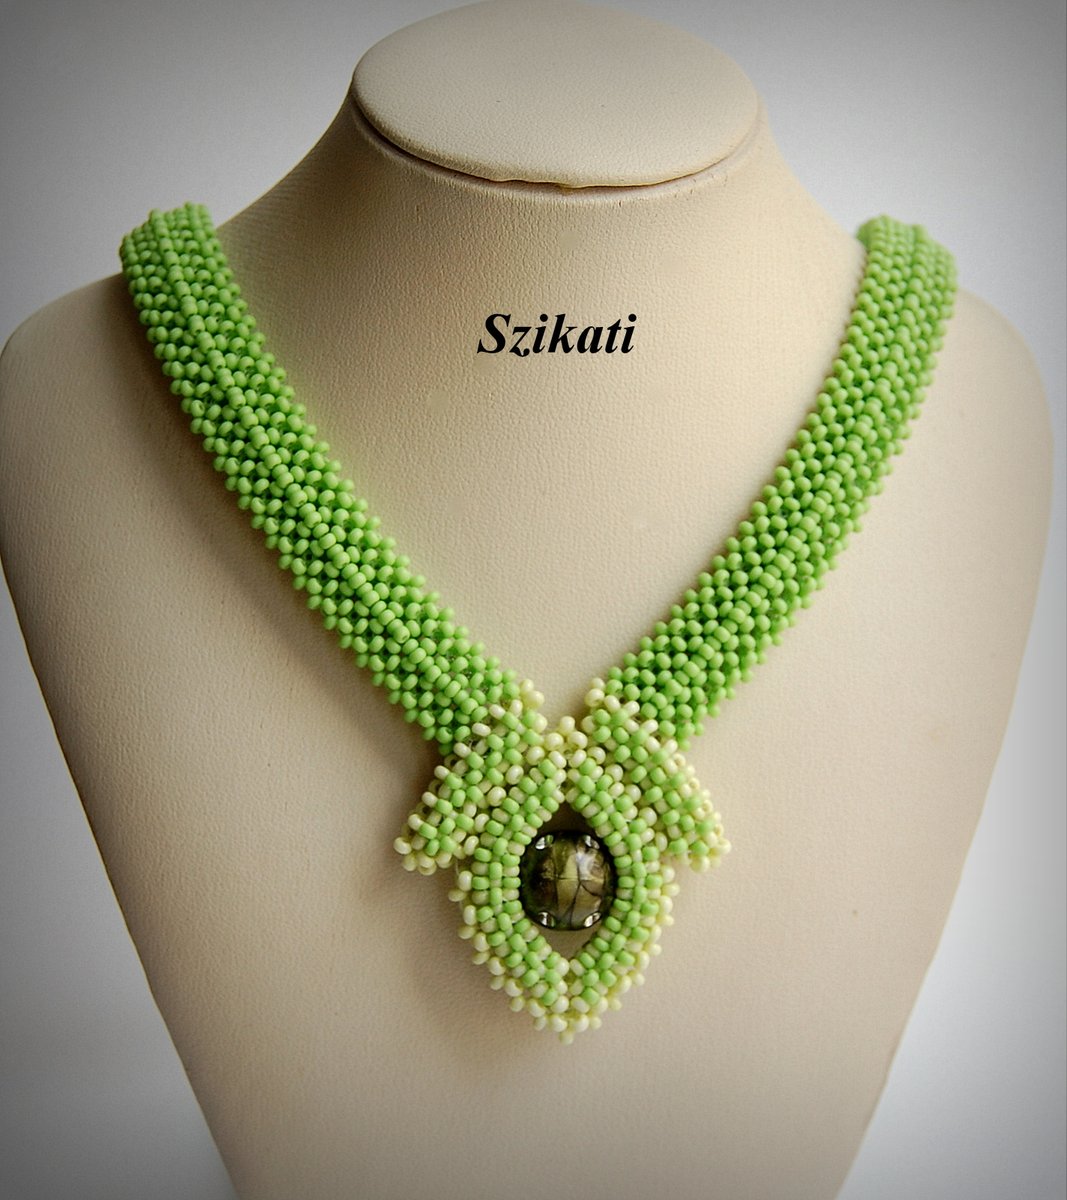 Green Beadwoven Necklace
You can purchase it here:
meska.hu/p4580523-zold-…